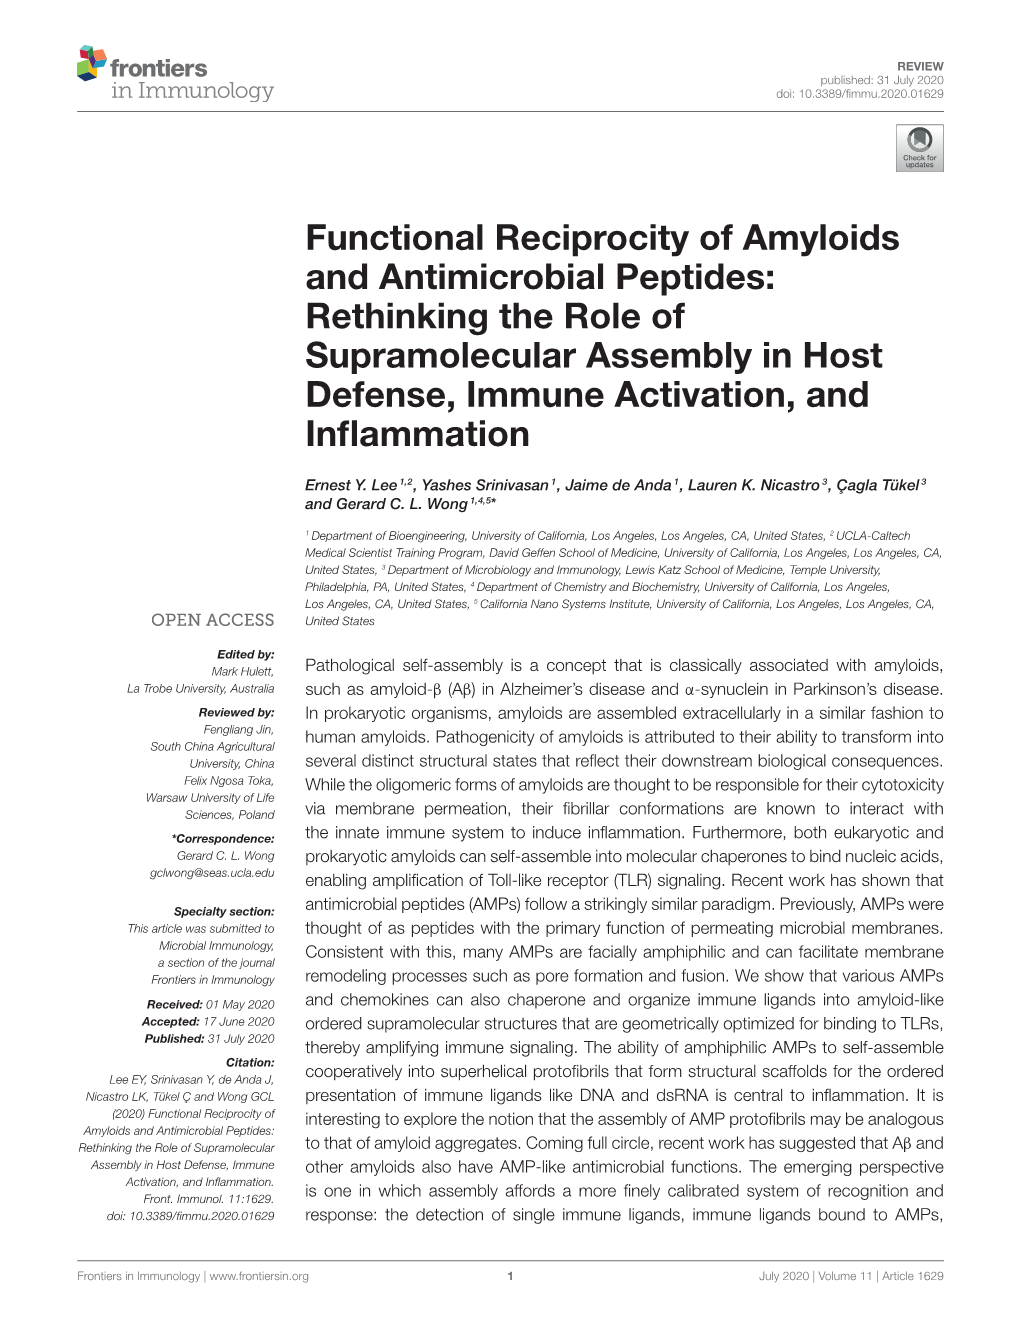 Functional Reciprocity of Amyloids and Antimicrobial Peptides: Rethinking the Role of Supramolecular Assembly in Host Defense, Immune Activation, and Inﬂammation